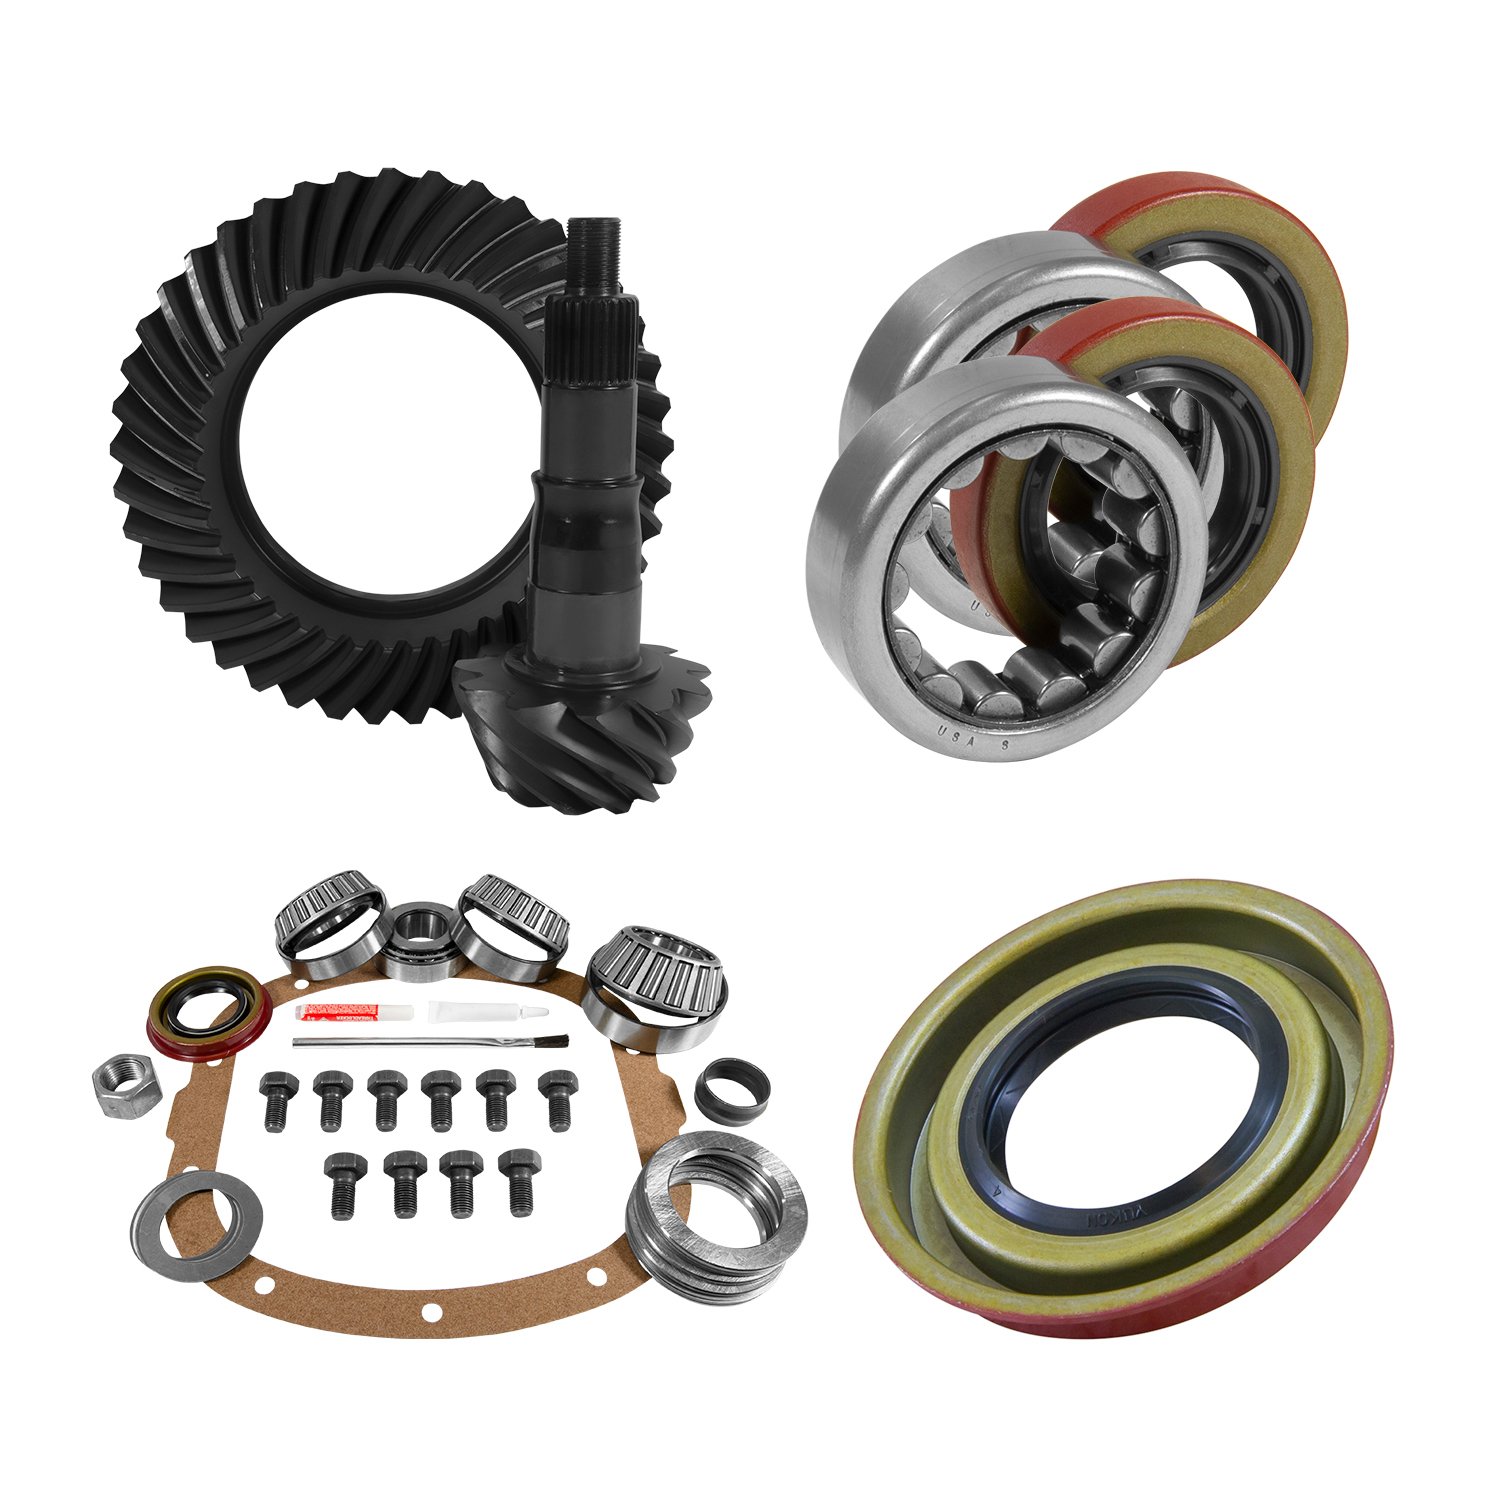 USA Standard 10694 7.5 in./7.625 in. GM 4.11 Rear Ring & Pinion Install Kit, 2.25 in. Od Axle Bearings